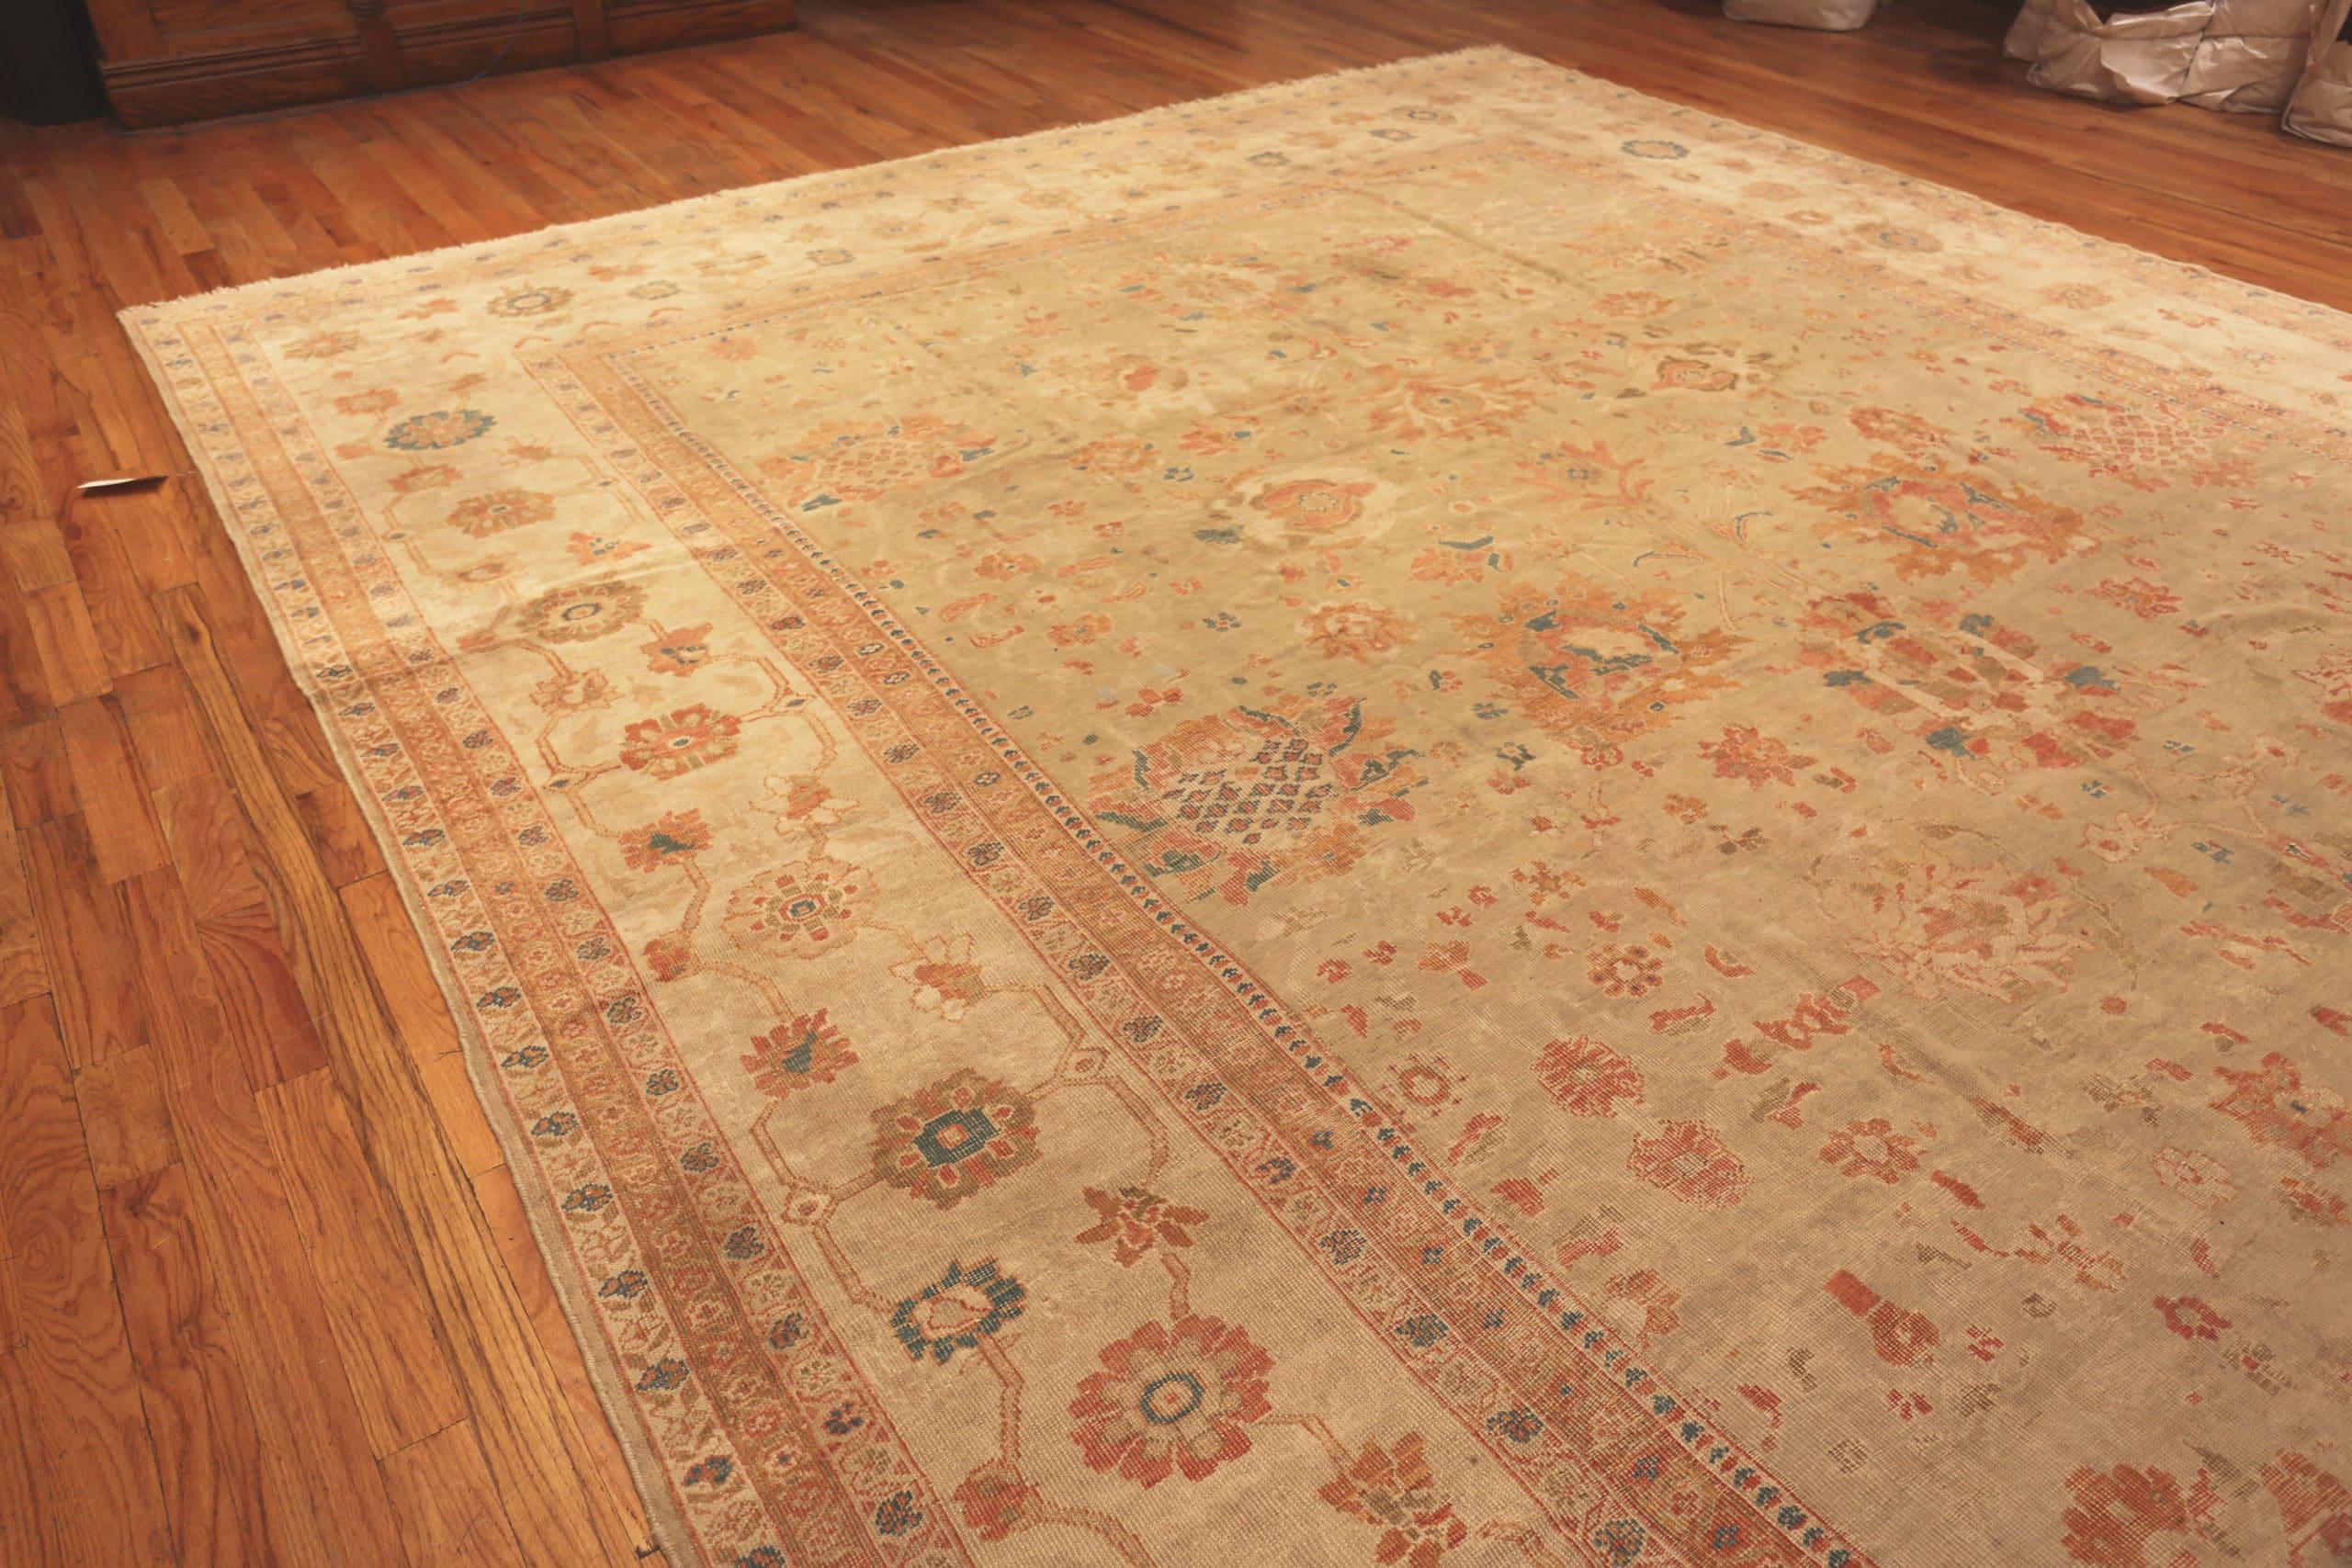 Oversized Antique Persian Sultanabad Rug, Country of Origin: Persian rugs, Circa date 1880. Size: 13 ft 10 in x 22 ft 8 in (4.22 m x 6.91 m)
 